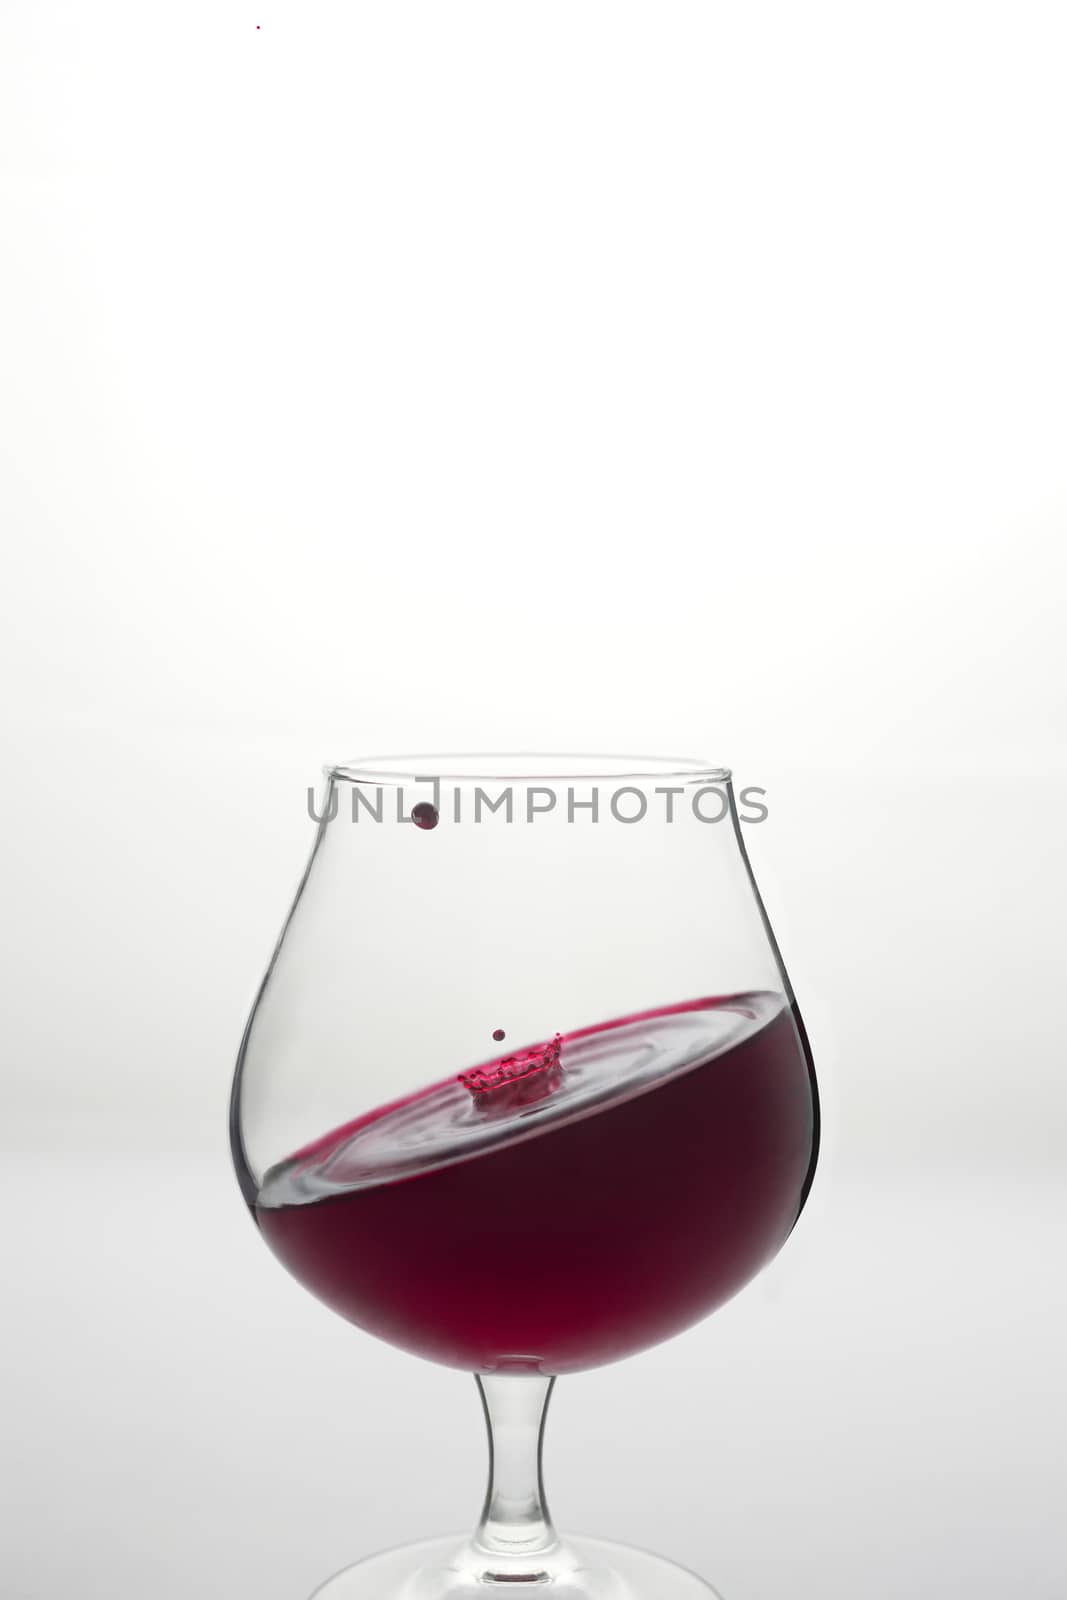 Creative wine glass with inclined level of wine and wine drop above it on white background. Wine is not subject to gravity. Conceptual photo for sommelier and gourmet. 